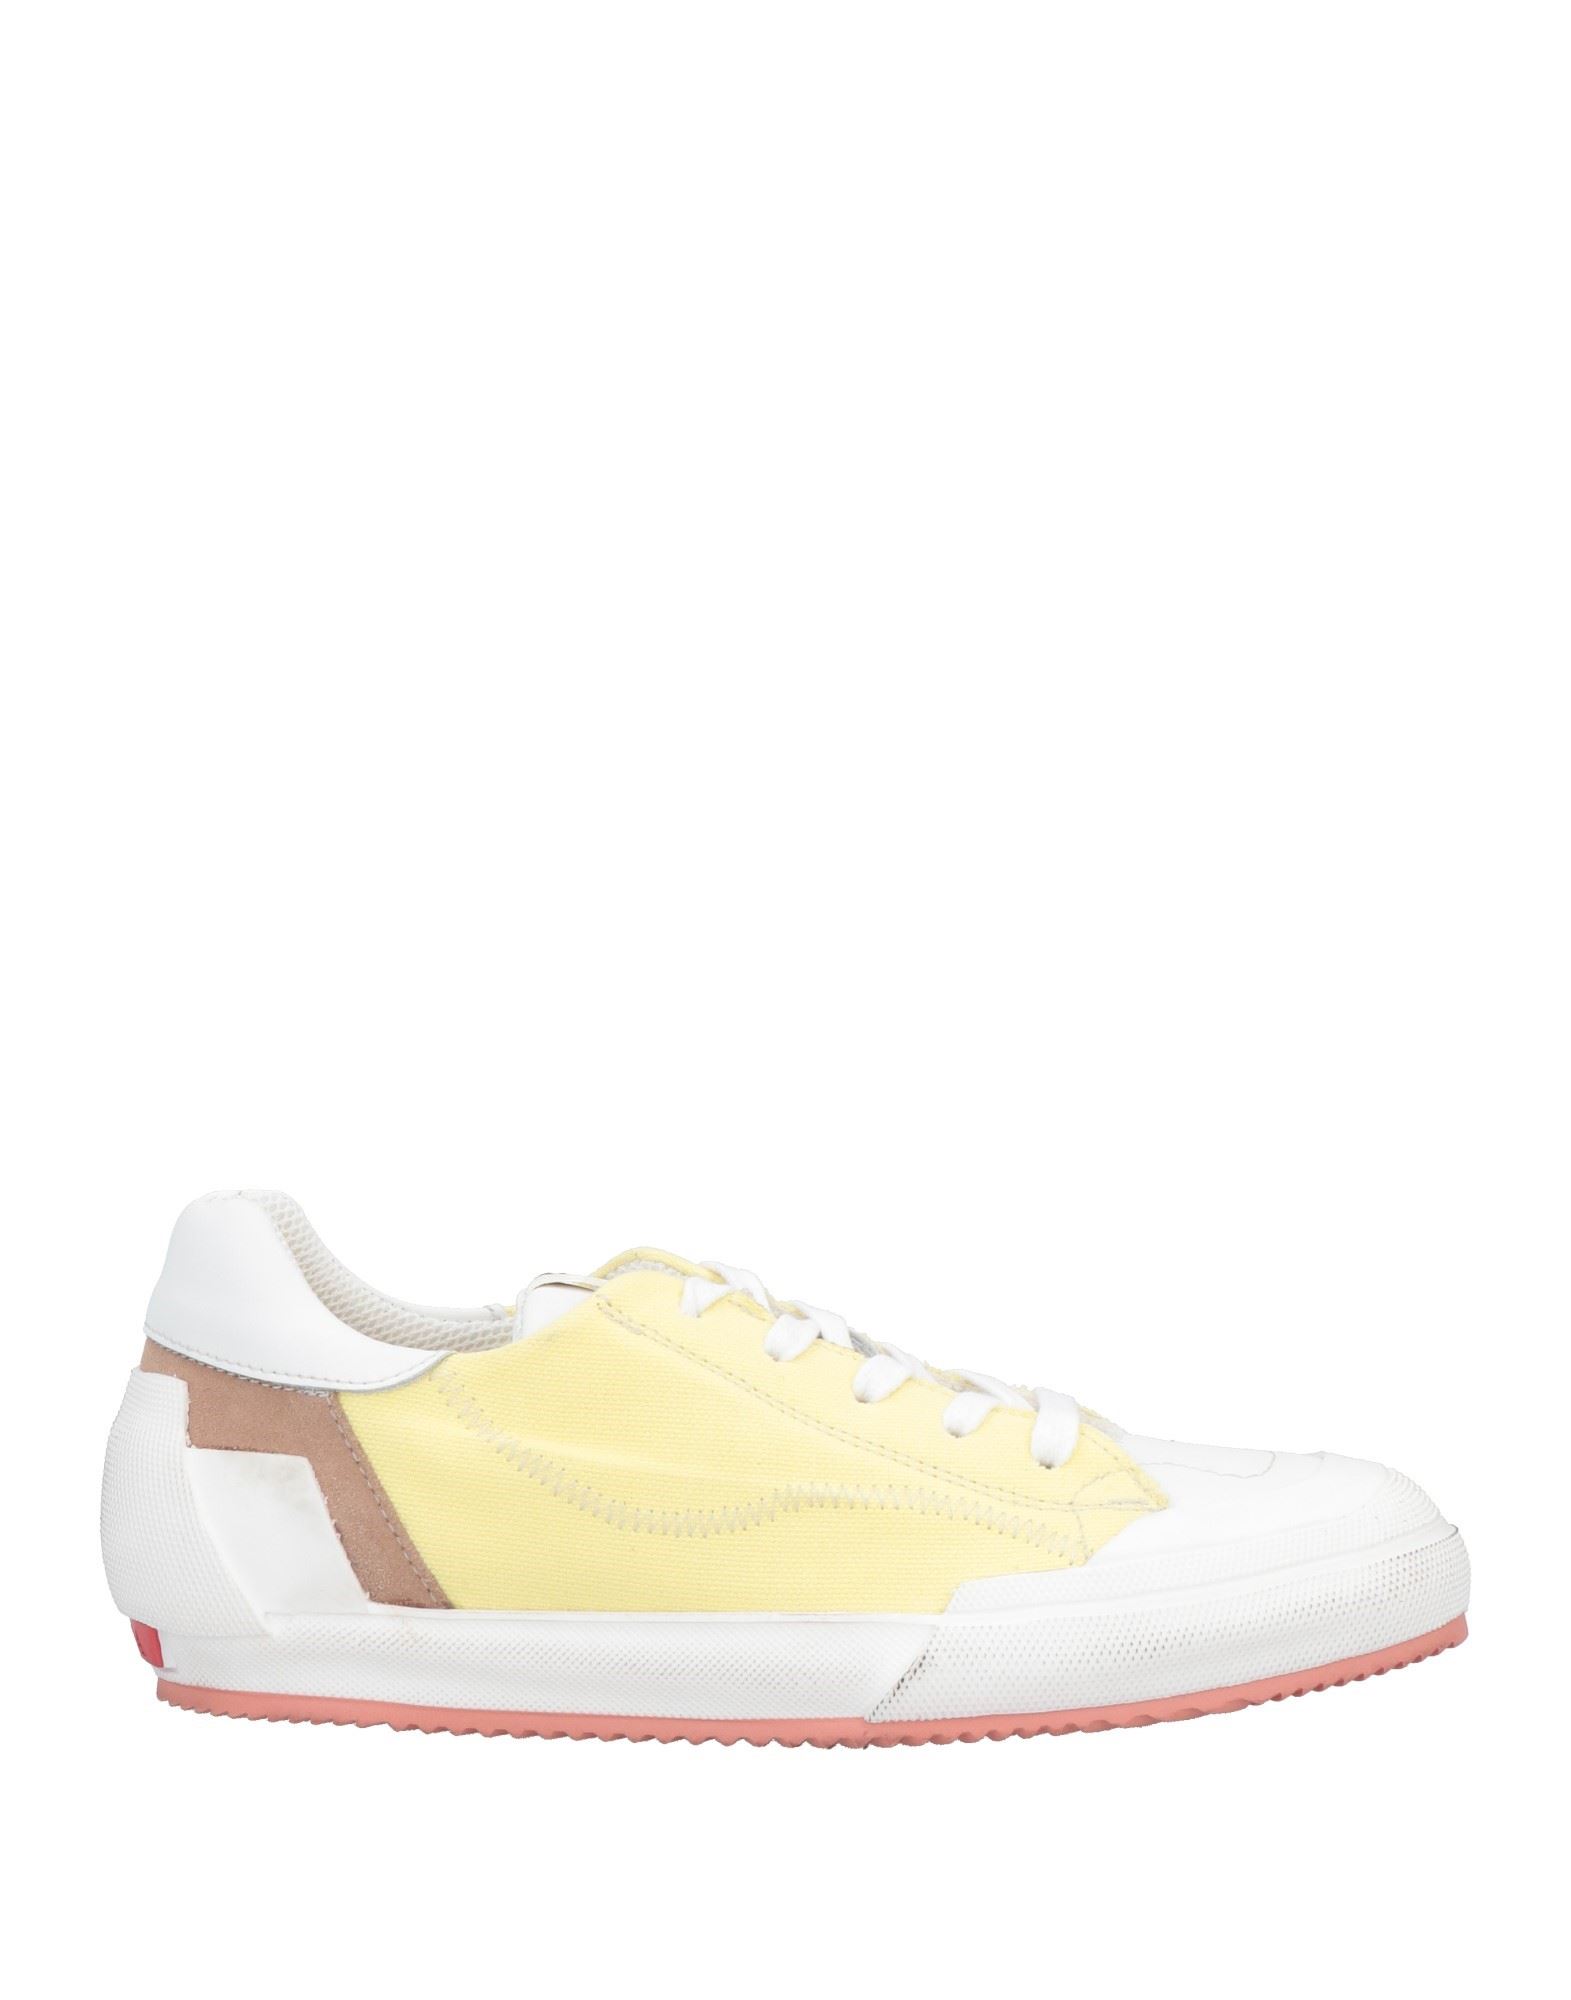 Andìa Fora Woman Sneakers Light Yellow Size 9 Soft Leather, Textile Fibers